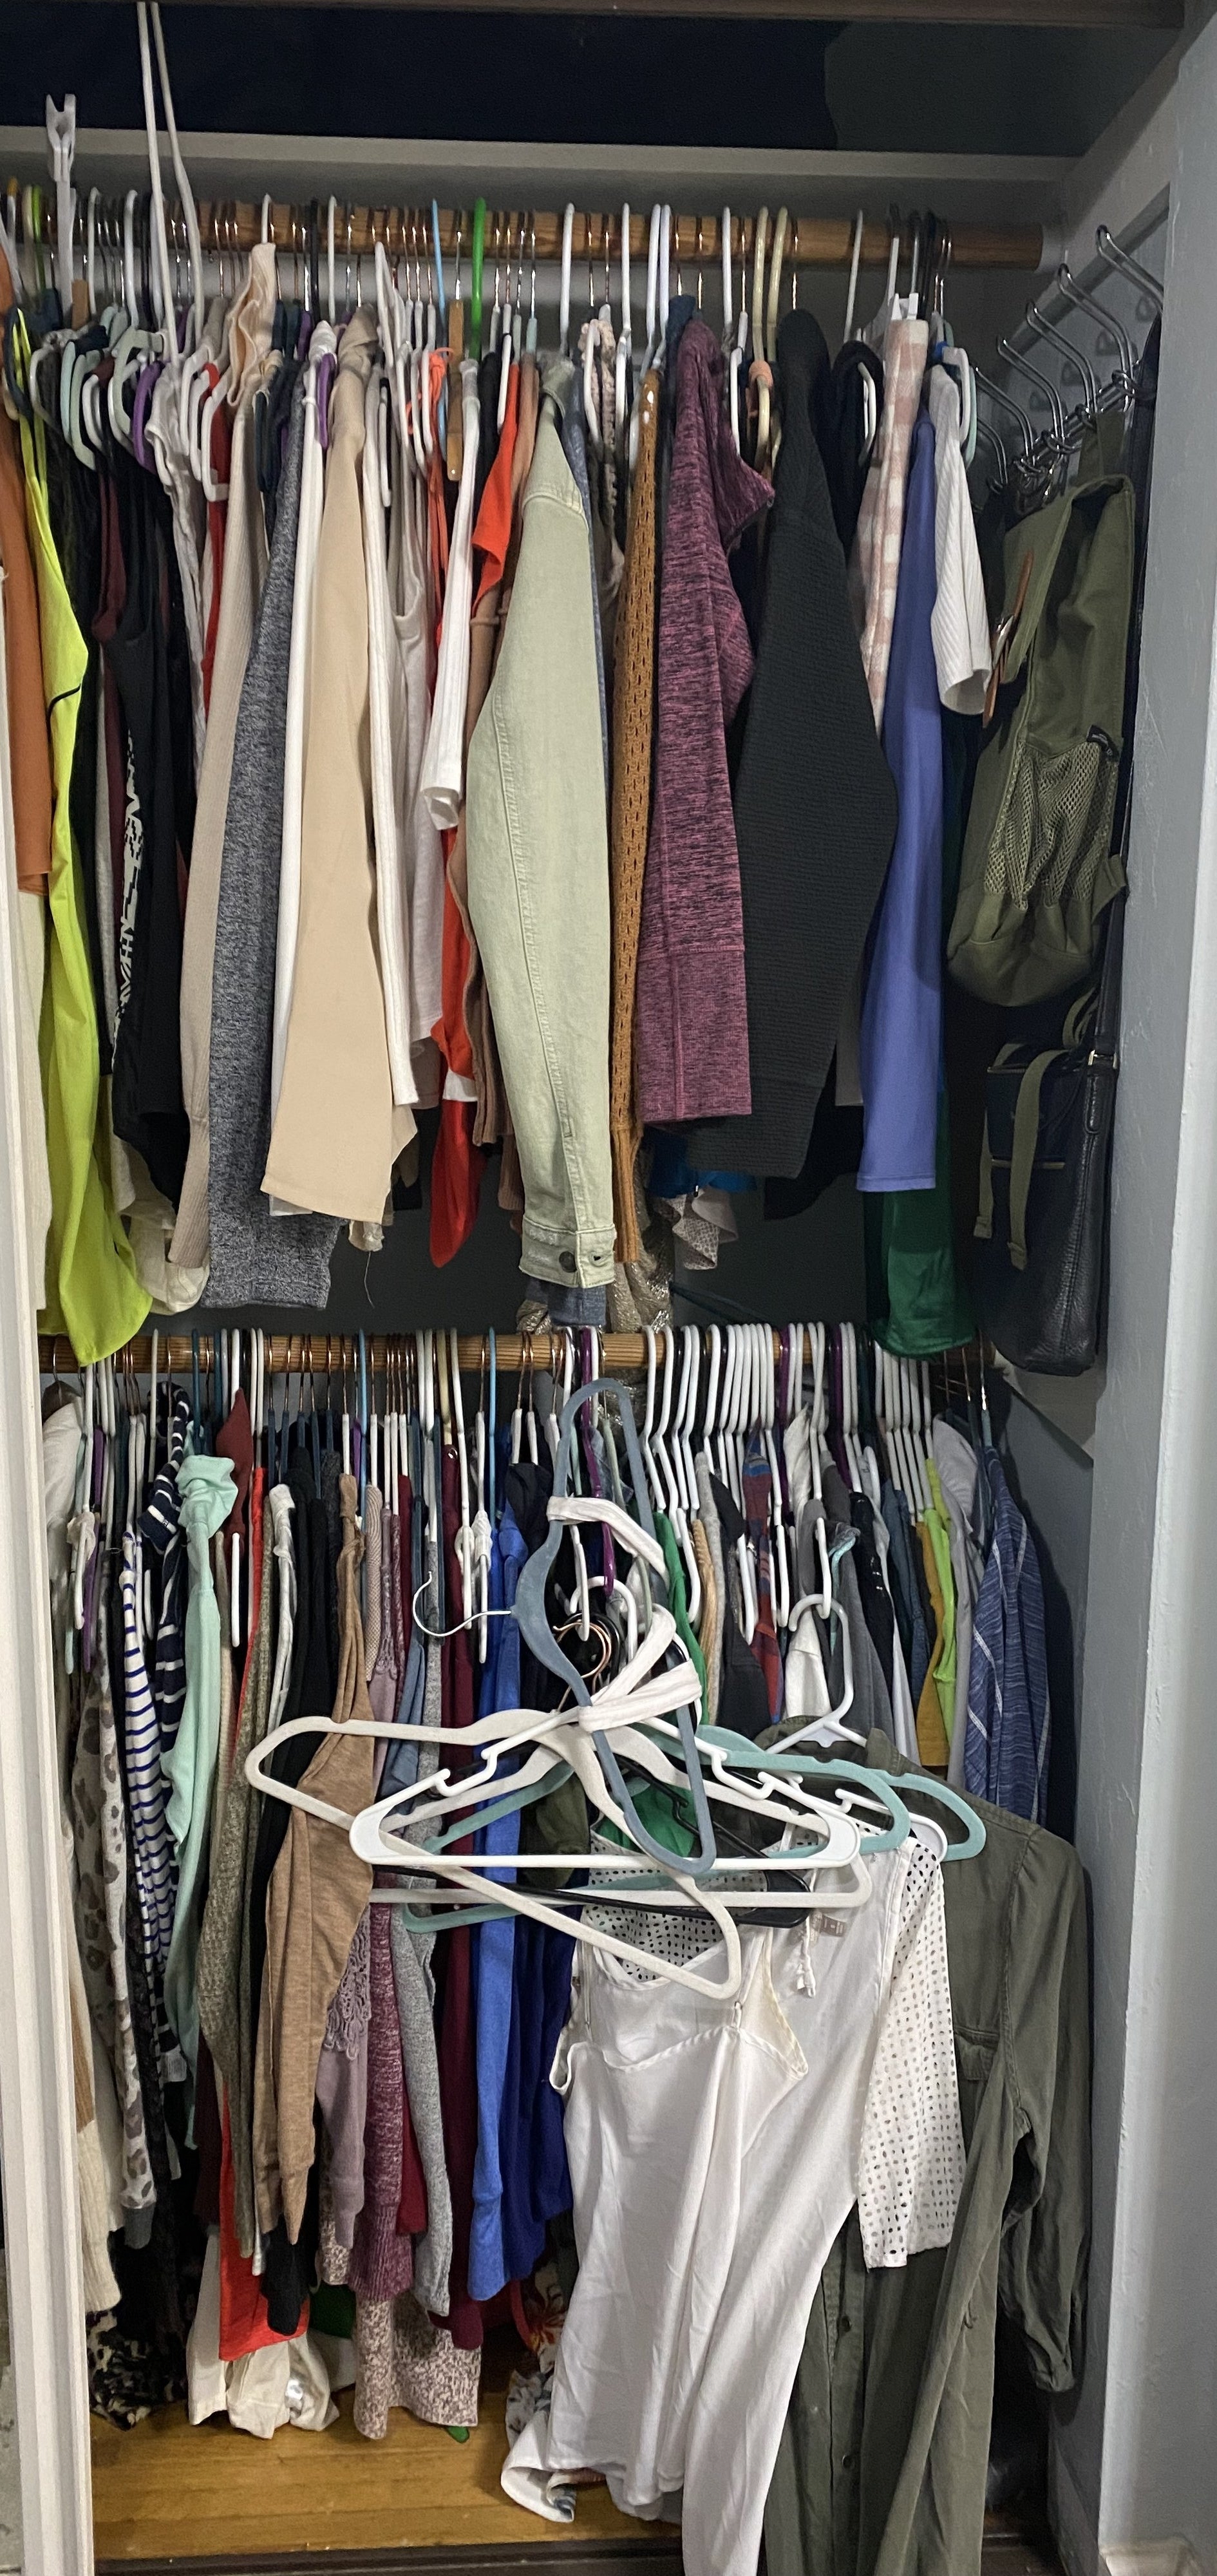 Cluttered closet in disarray